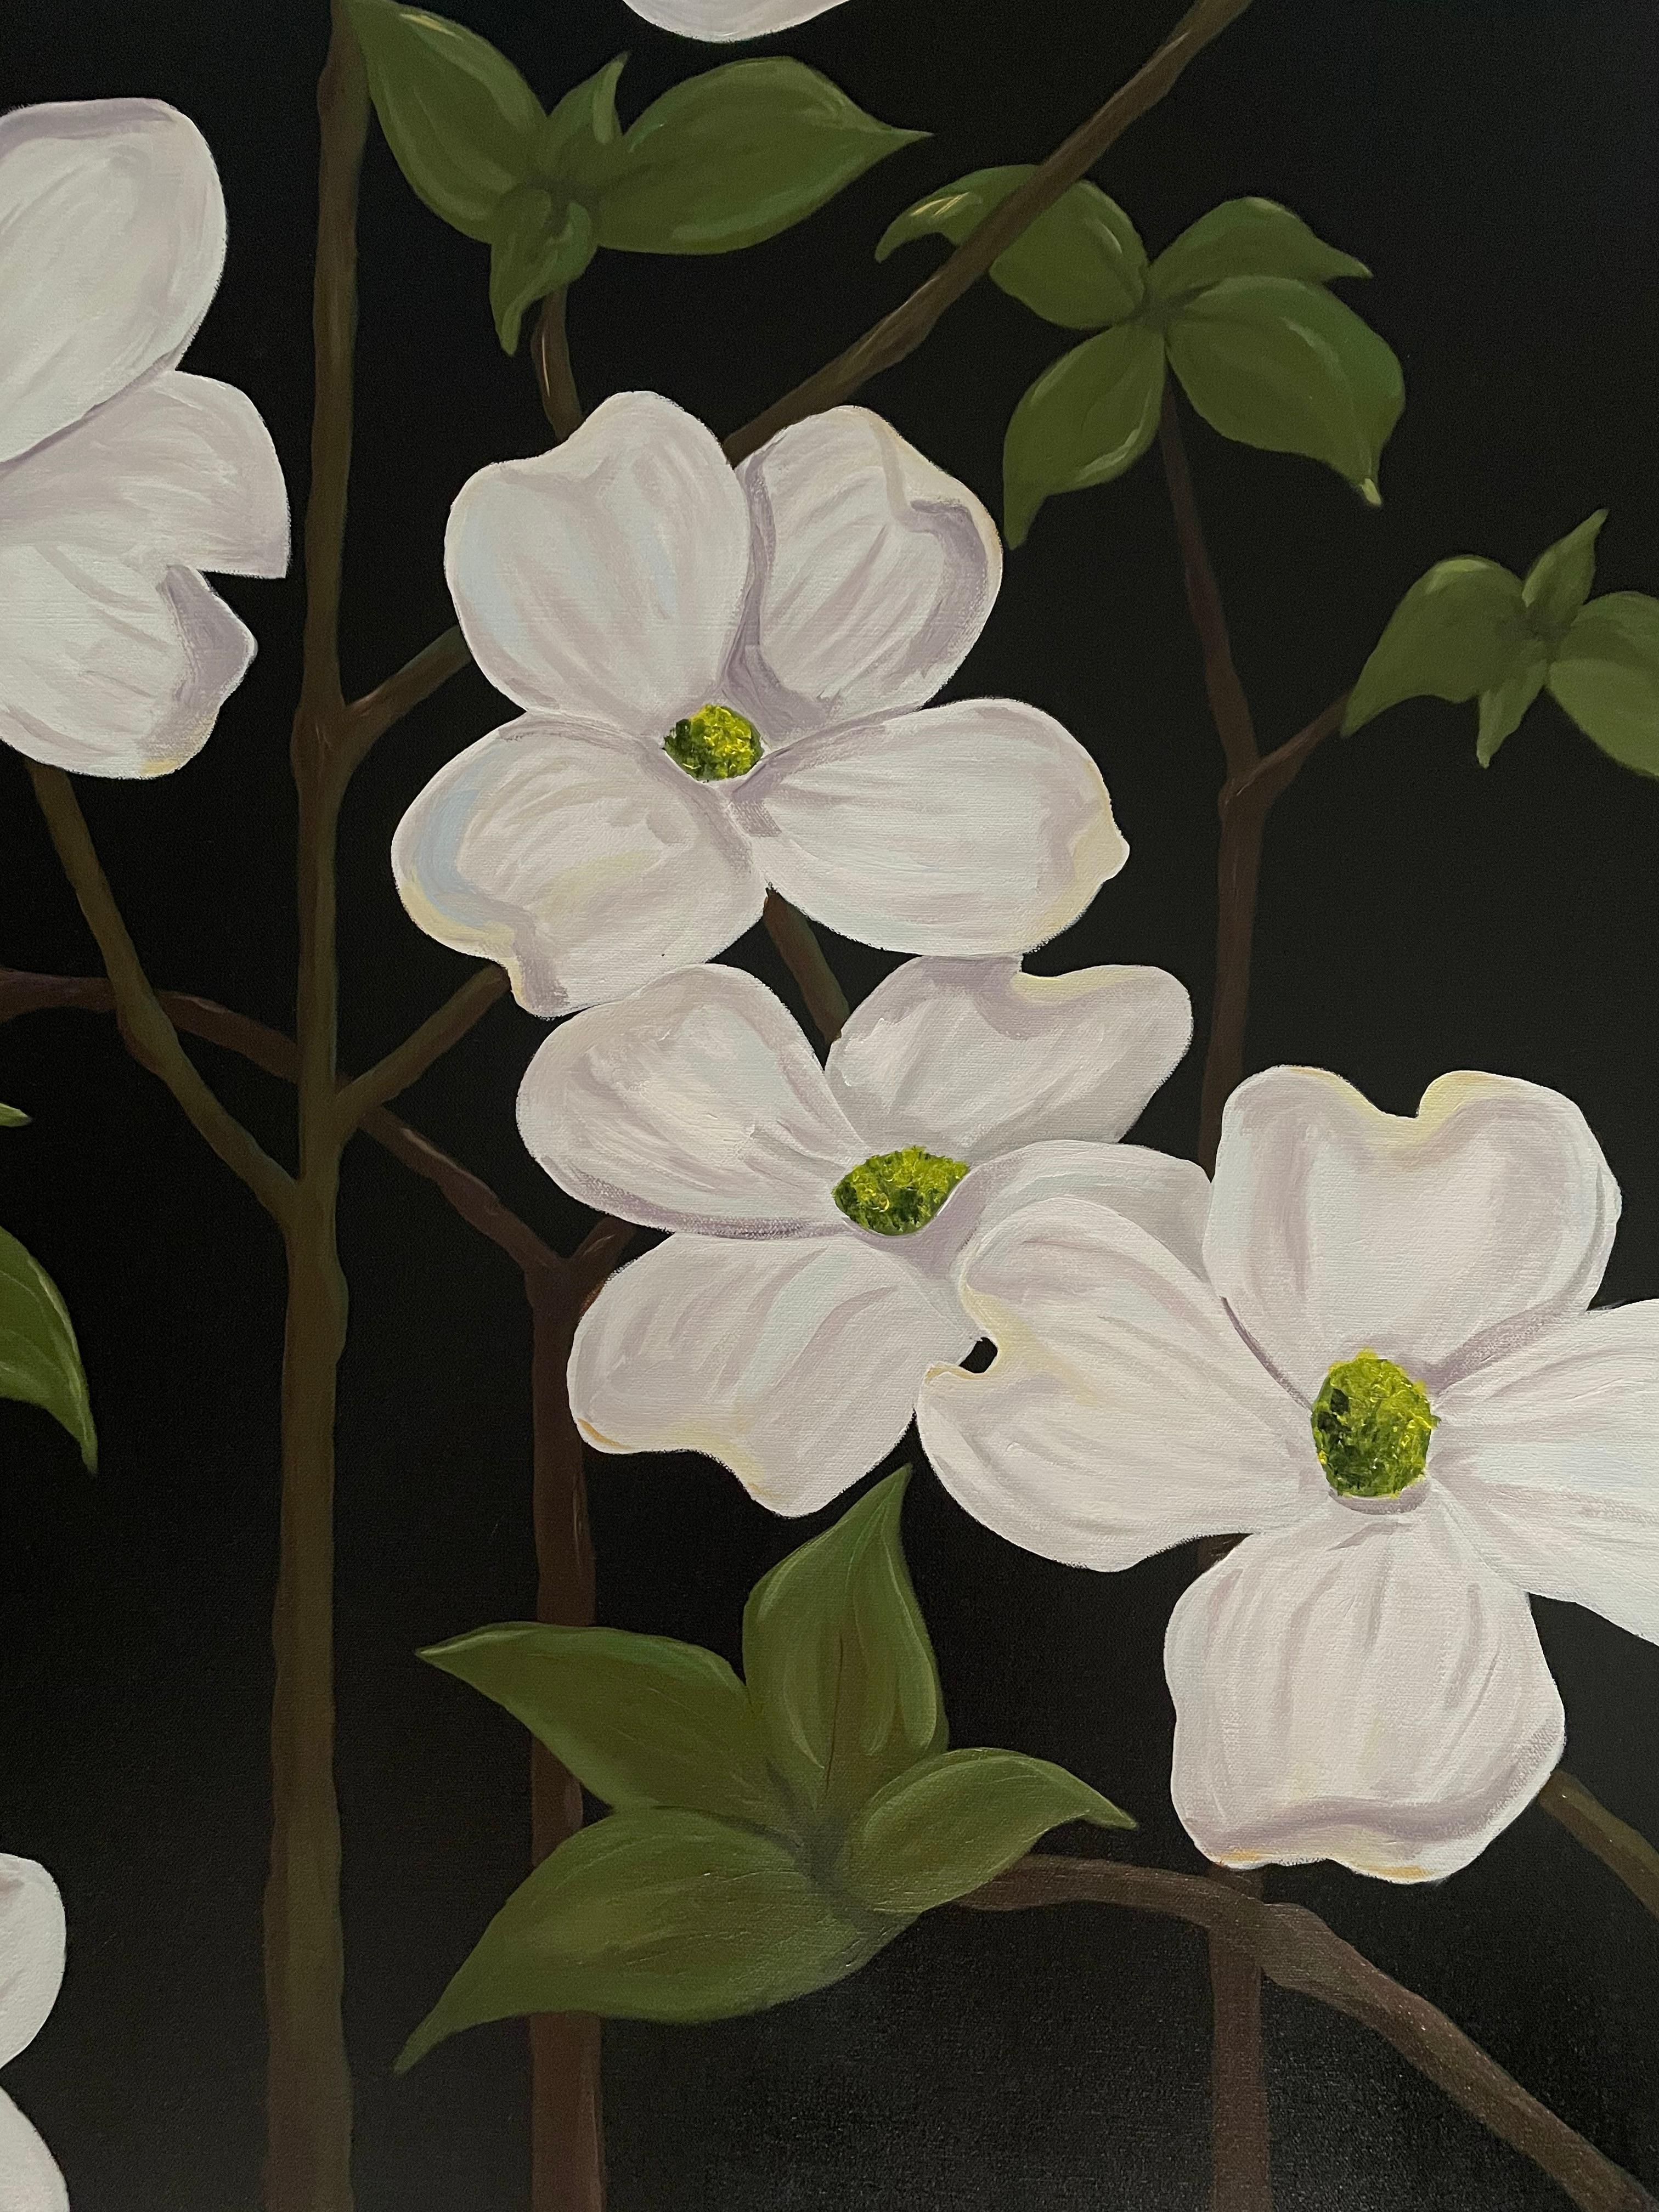 Jubilant White Flowers with Verdant Leaves on Branches. Title - Wild Dogwood For Sale 1